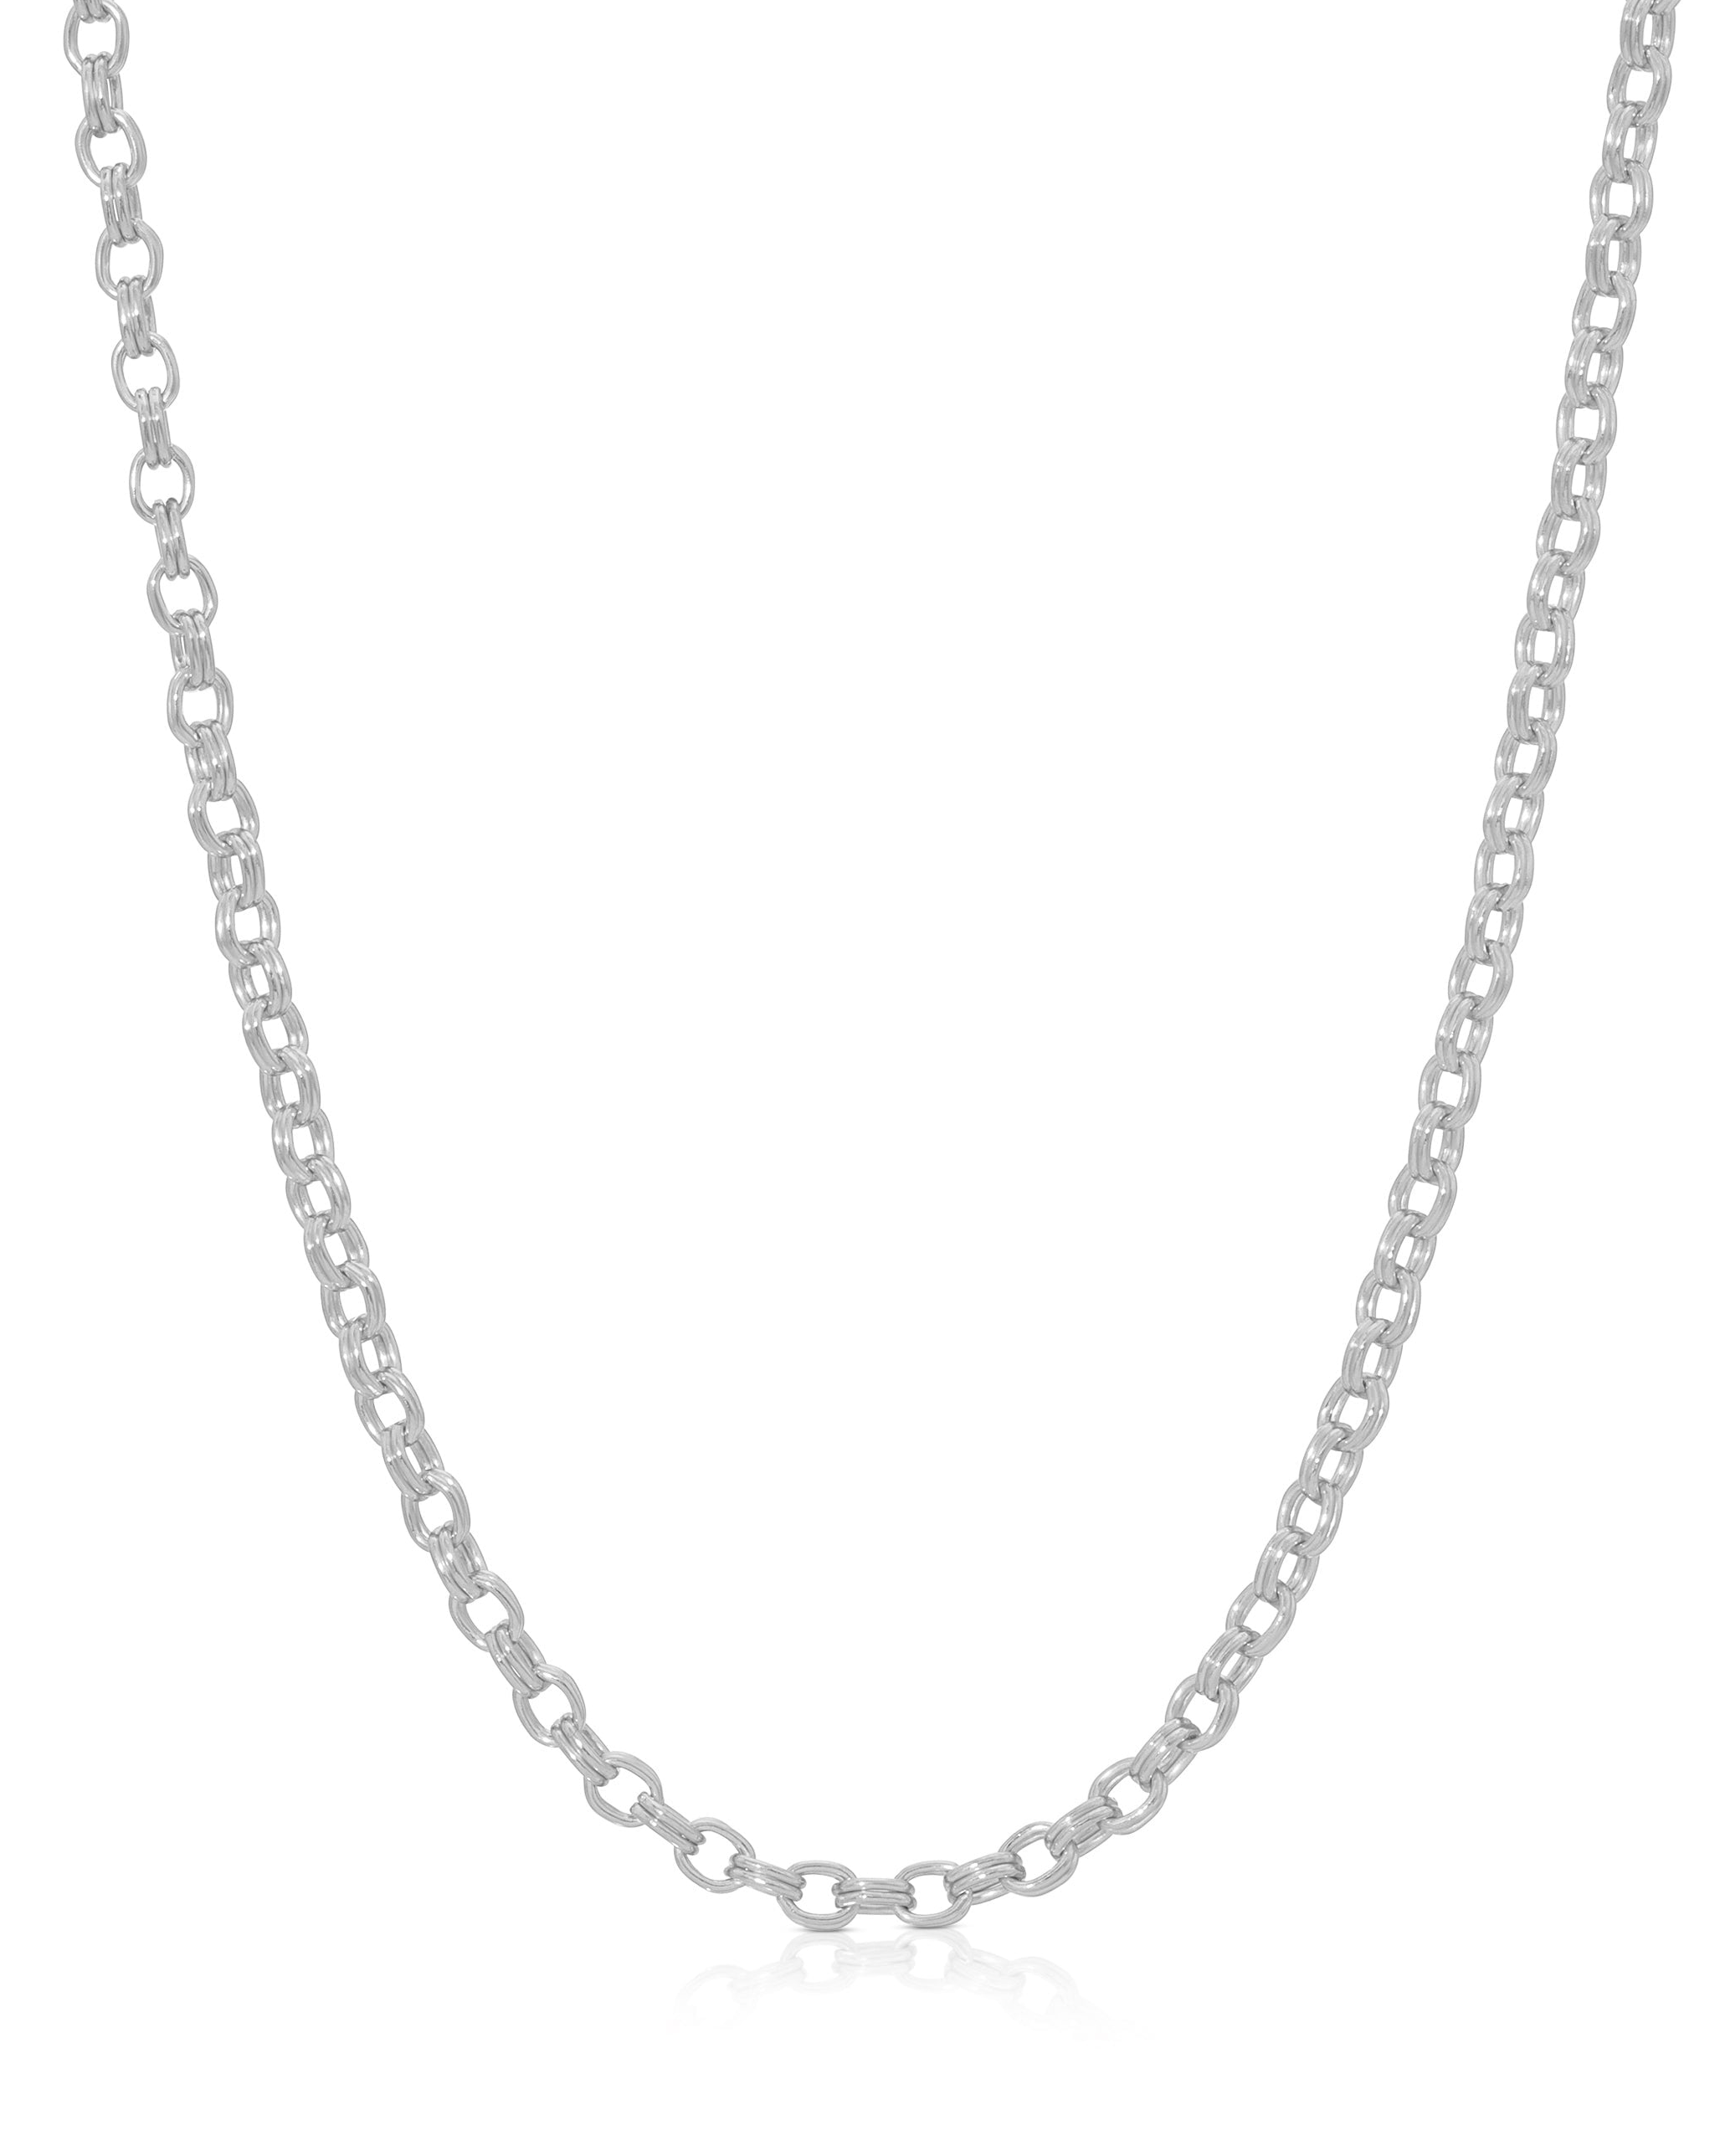 Blackpool Necklace